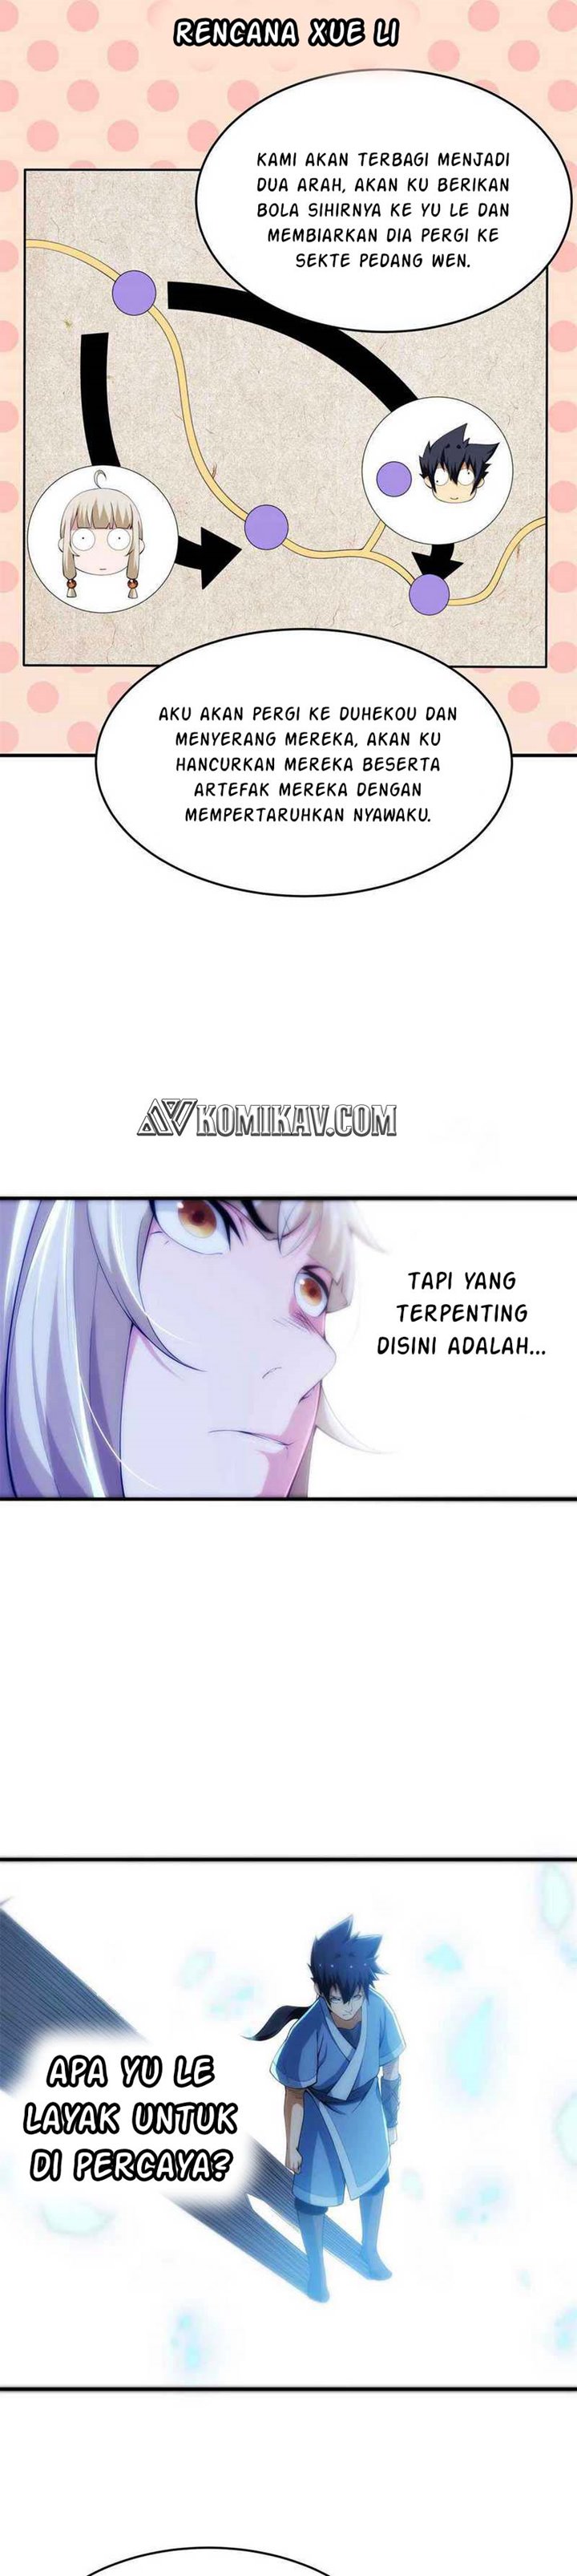 Dilarang COPAS - situs resmi www.mangacanblog.com - Komik i just want to be beaten to death by everyone 020 - chapter 20 21 Indonesia i just want to be beaten to death by everyone 020 - chapter 20 Terbaru 7|Baca Manga Komik Indonesia|Mangacan